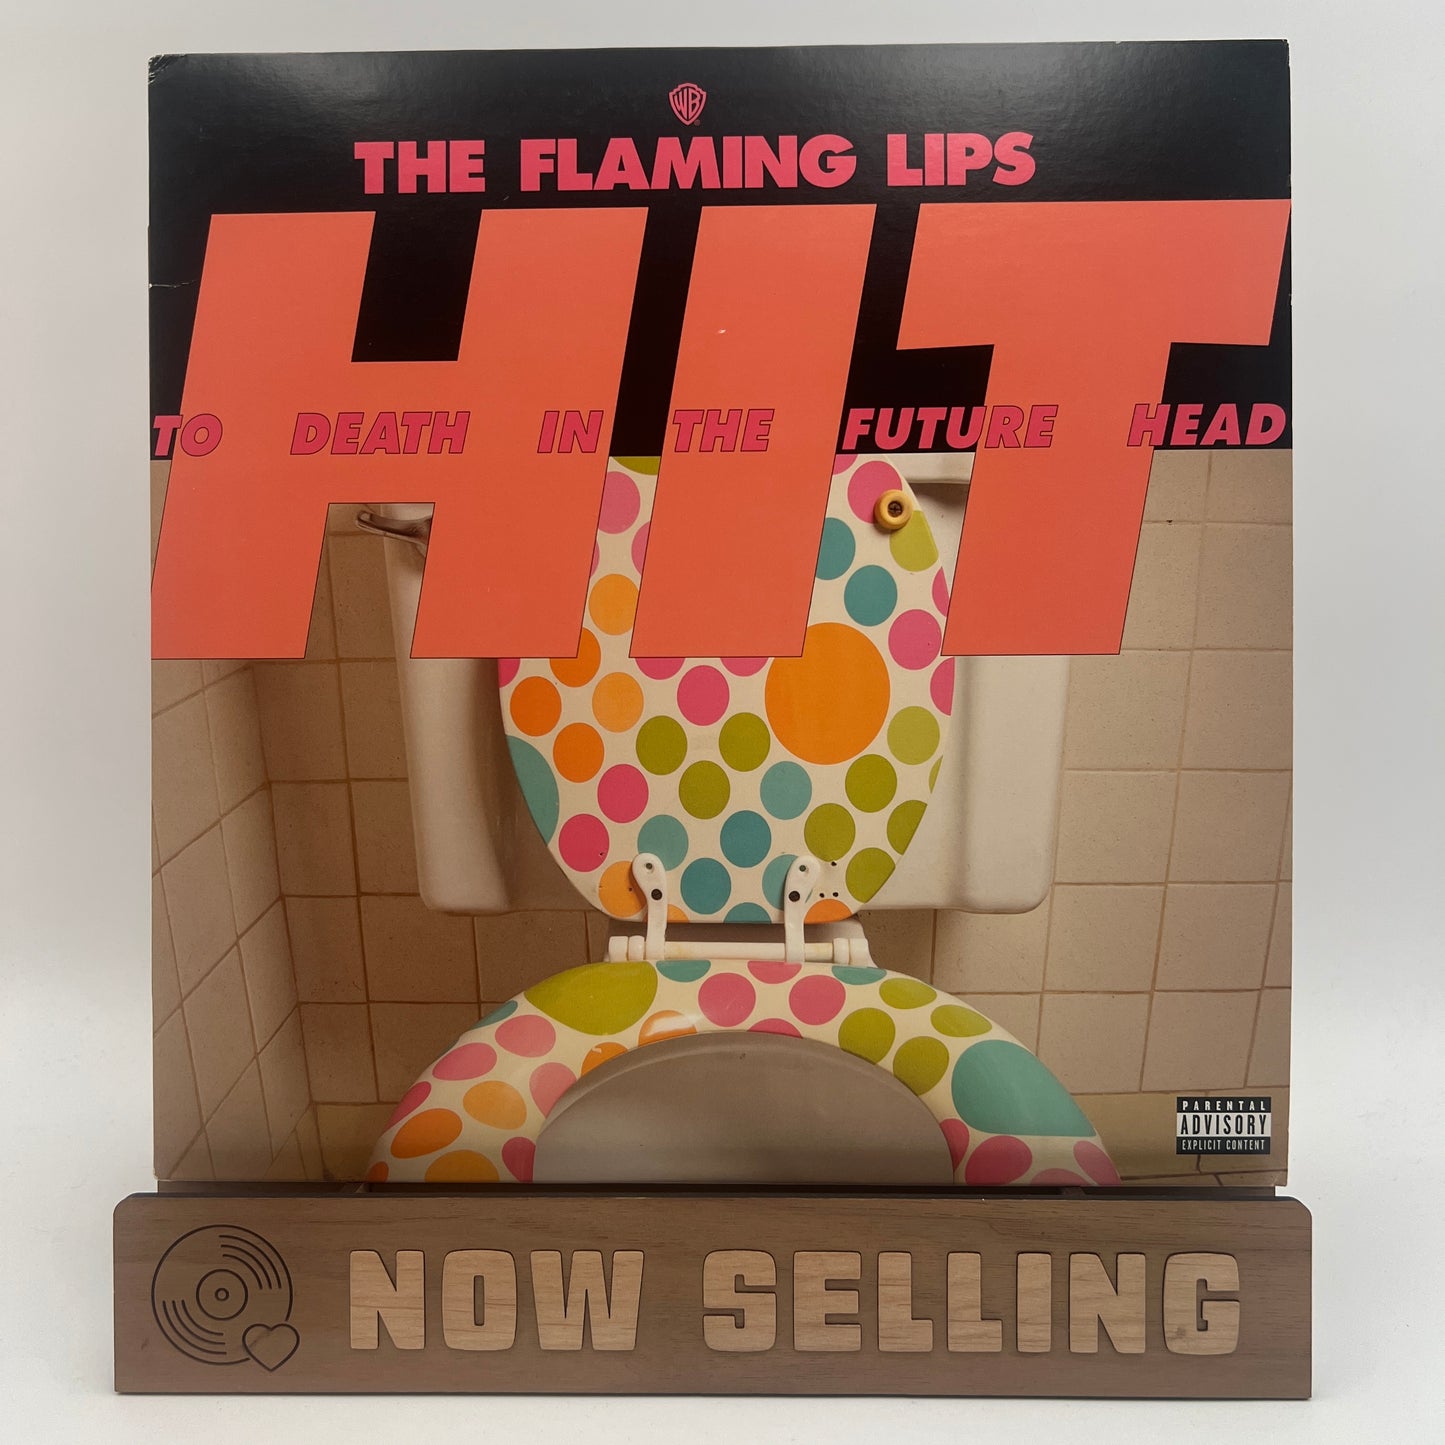 The Flaming Lips - Hit To Death In The Future Head Vinyl LP Reissue Remaster